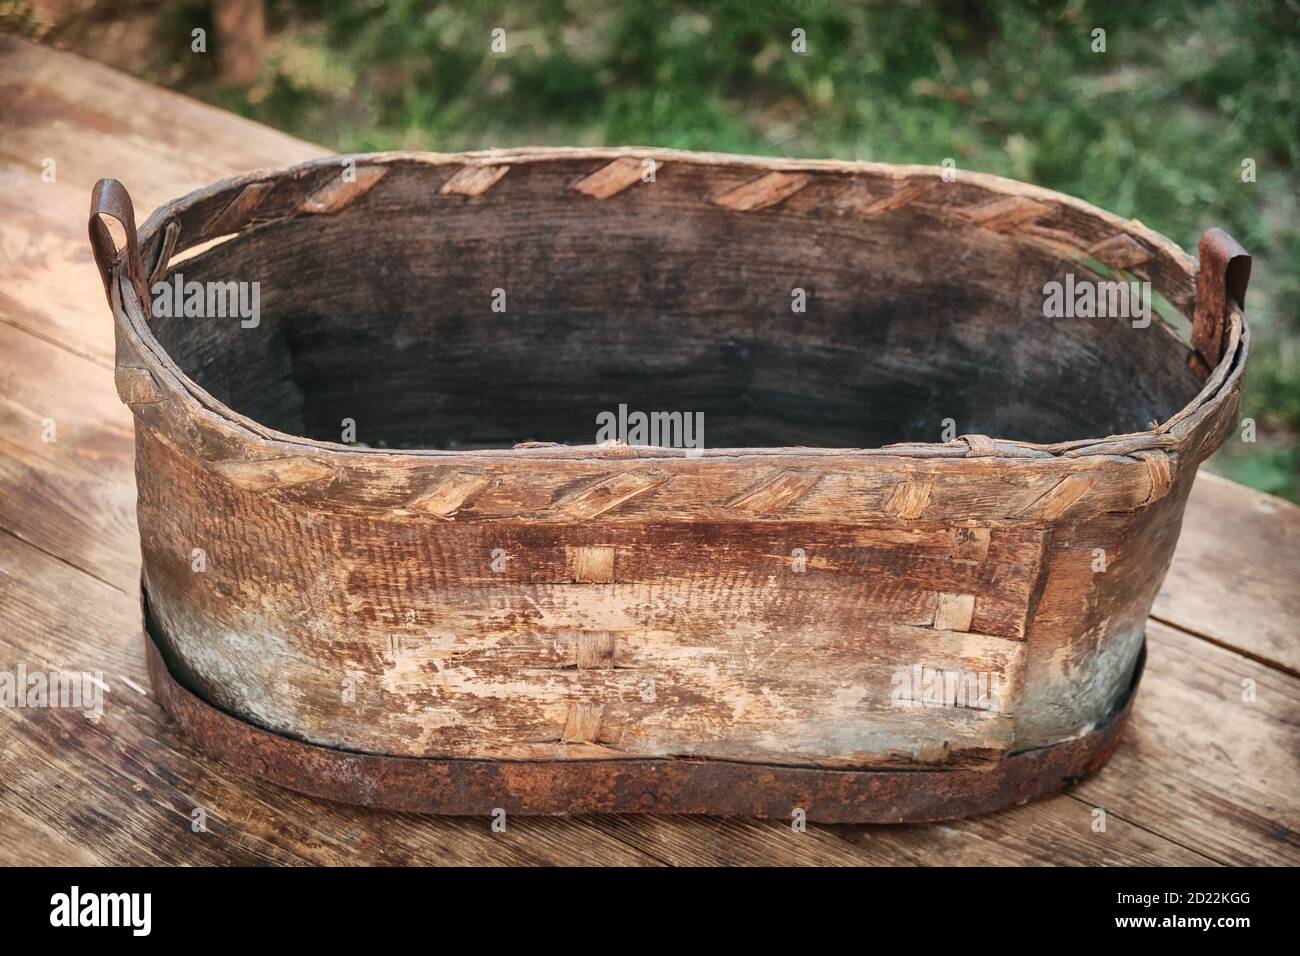 An old trough made from the bark of a tree. Vintage washtub woven from wood, with a metal rim at the bottom. Stock Photo